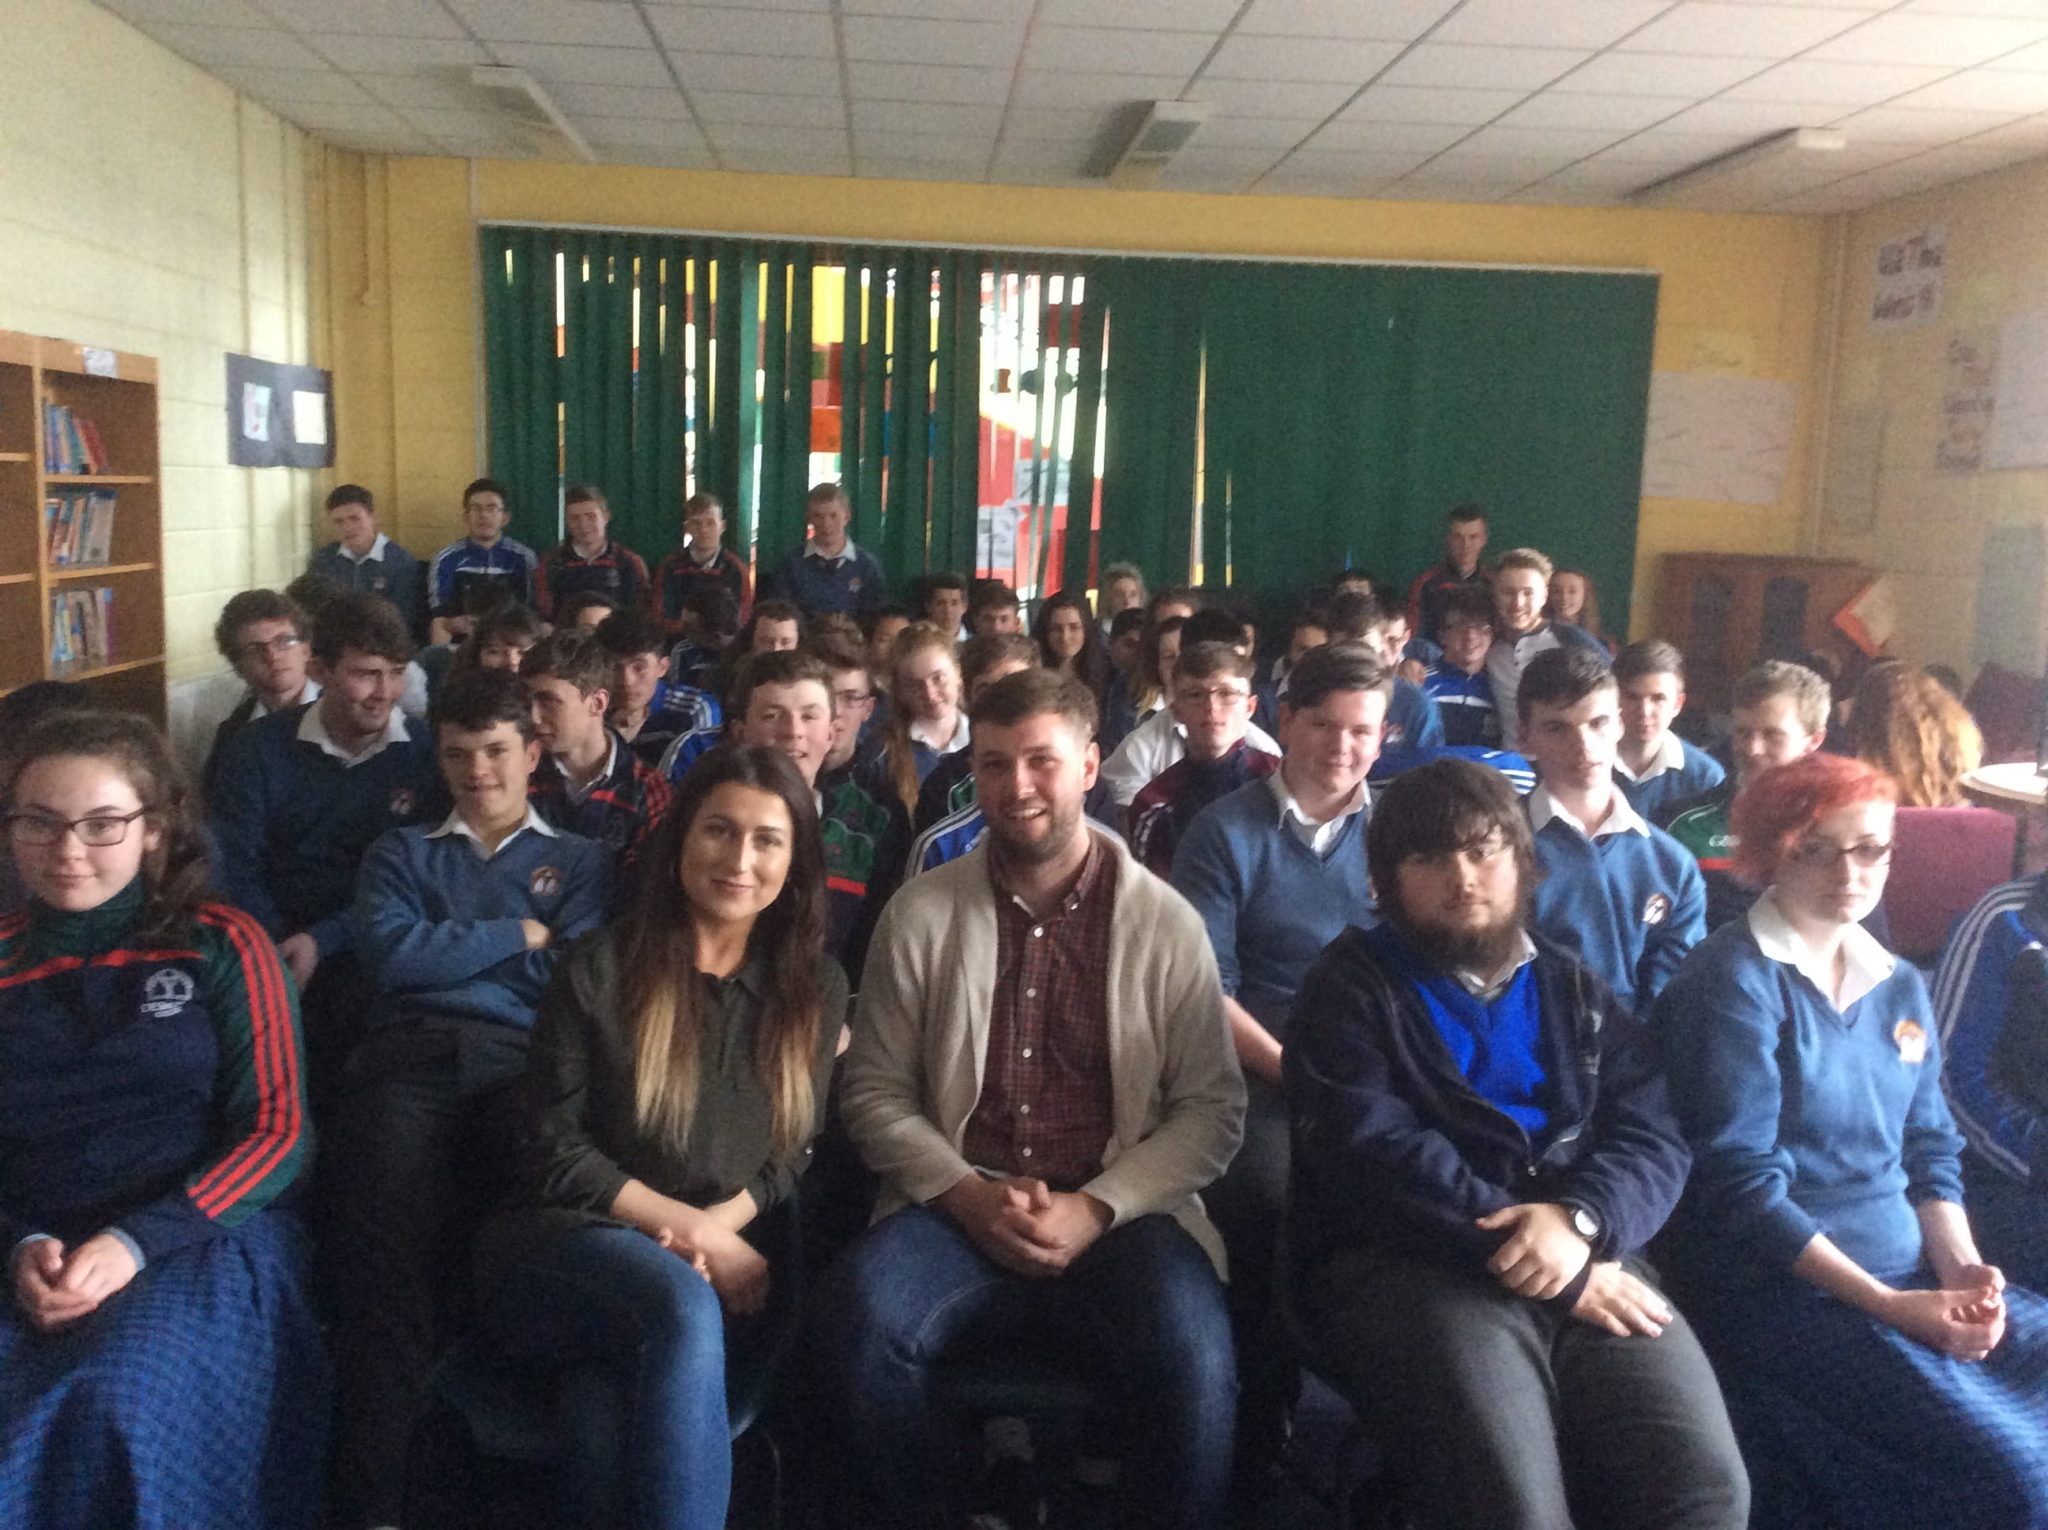 25th May 2016: Desmond College 5th year students listening to a talk about mental health from  Caolan (UL student welfare officer) and Claire.